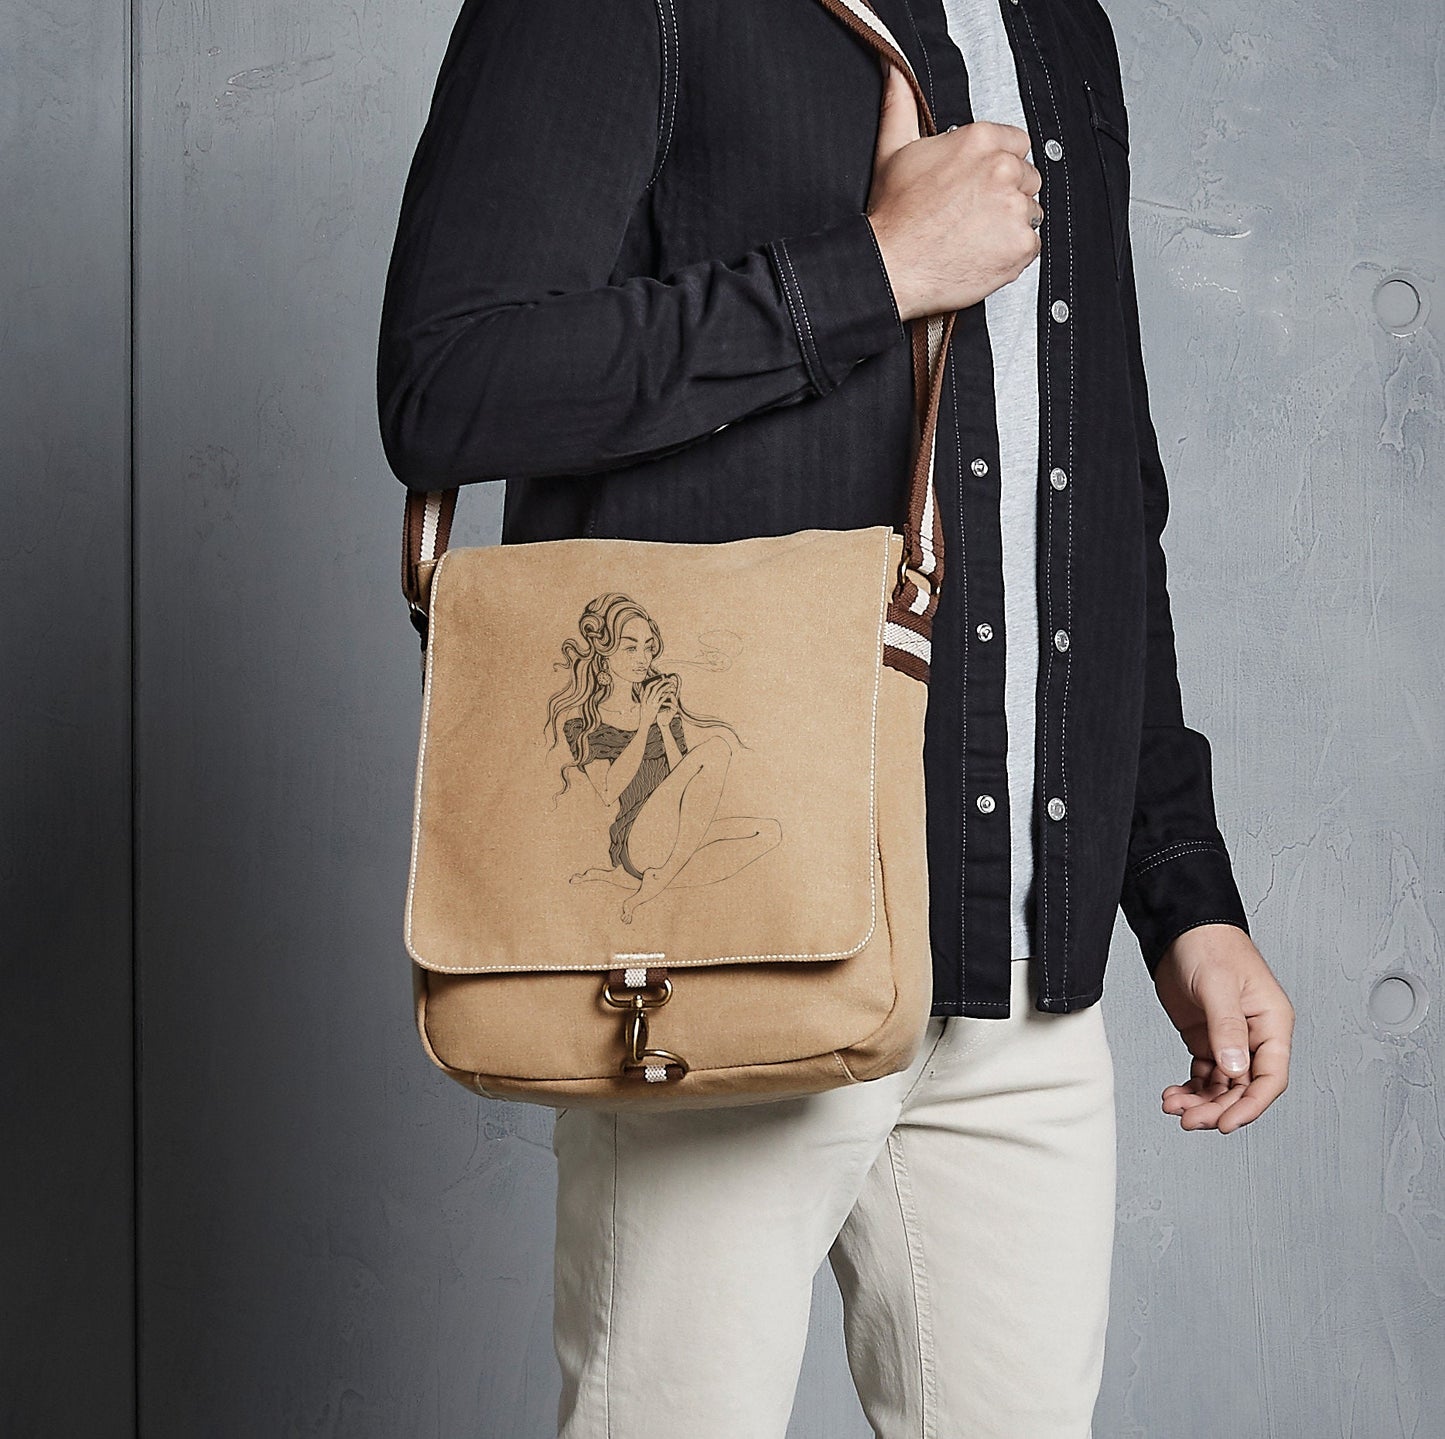 GIRL WITH COFFEE Canvas Bag. Vintage Style Bag. Canvas Messenger